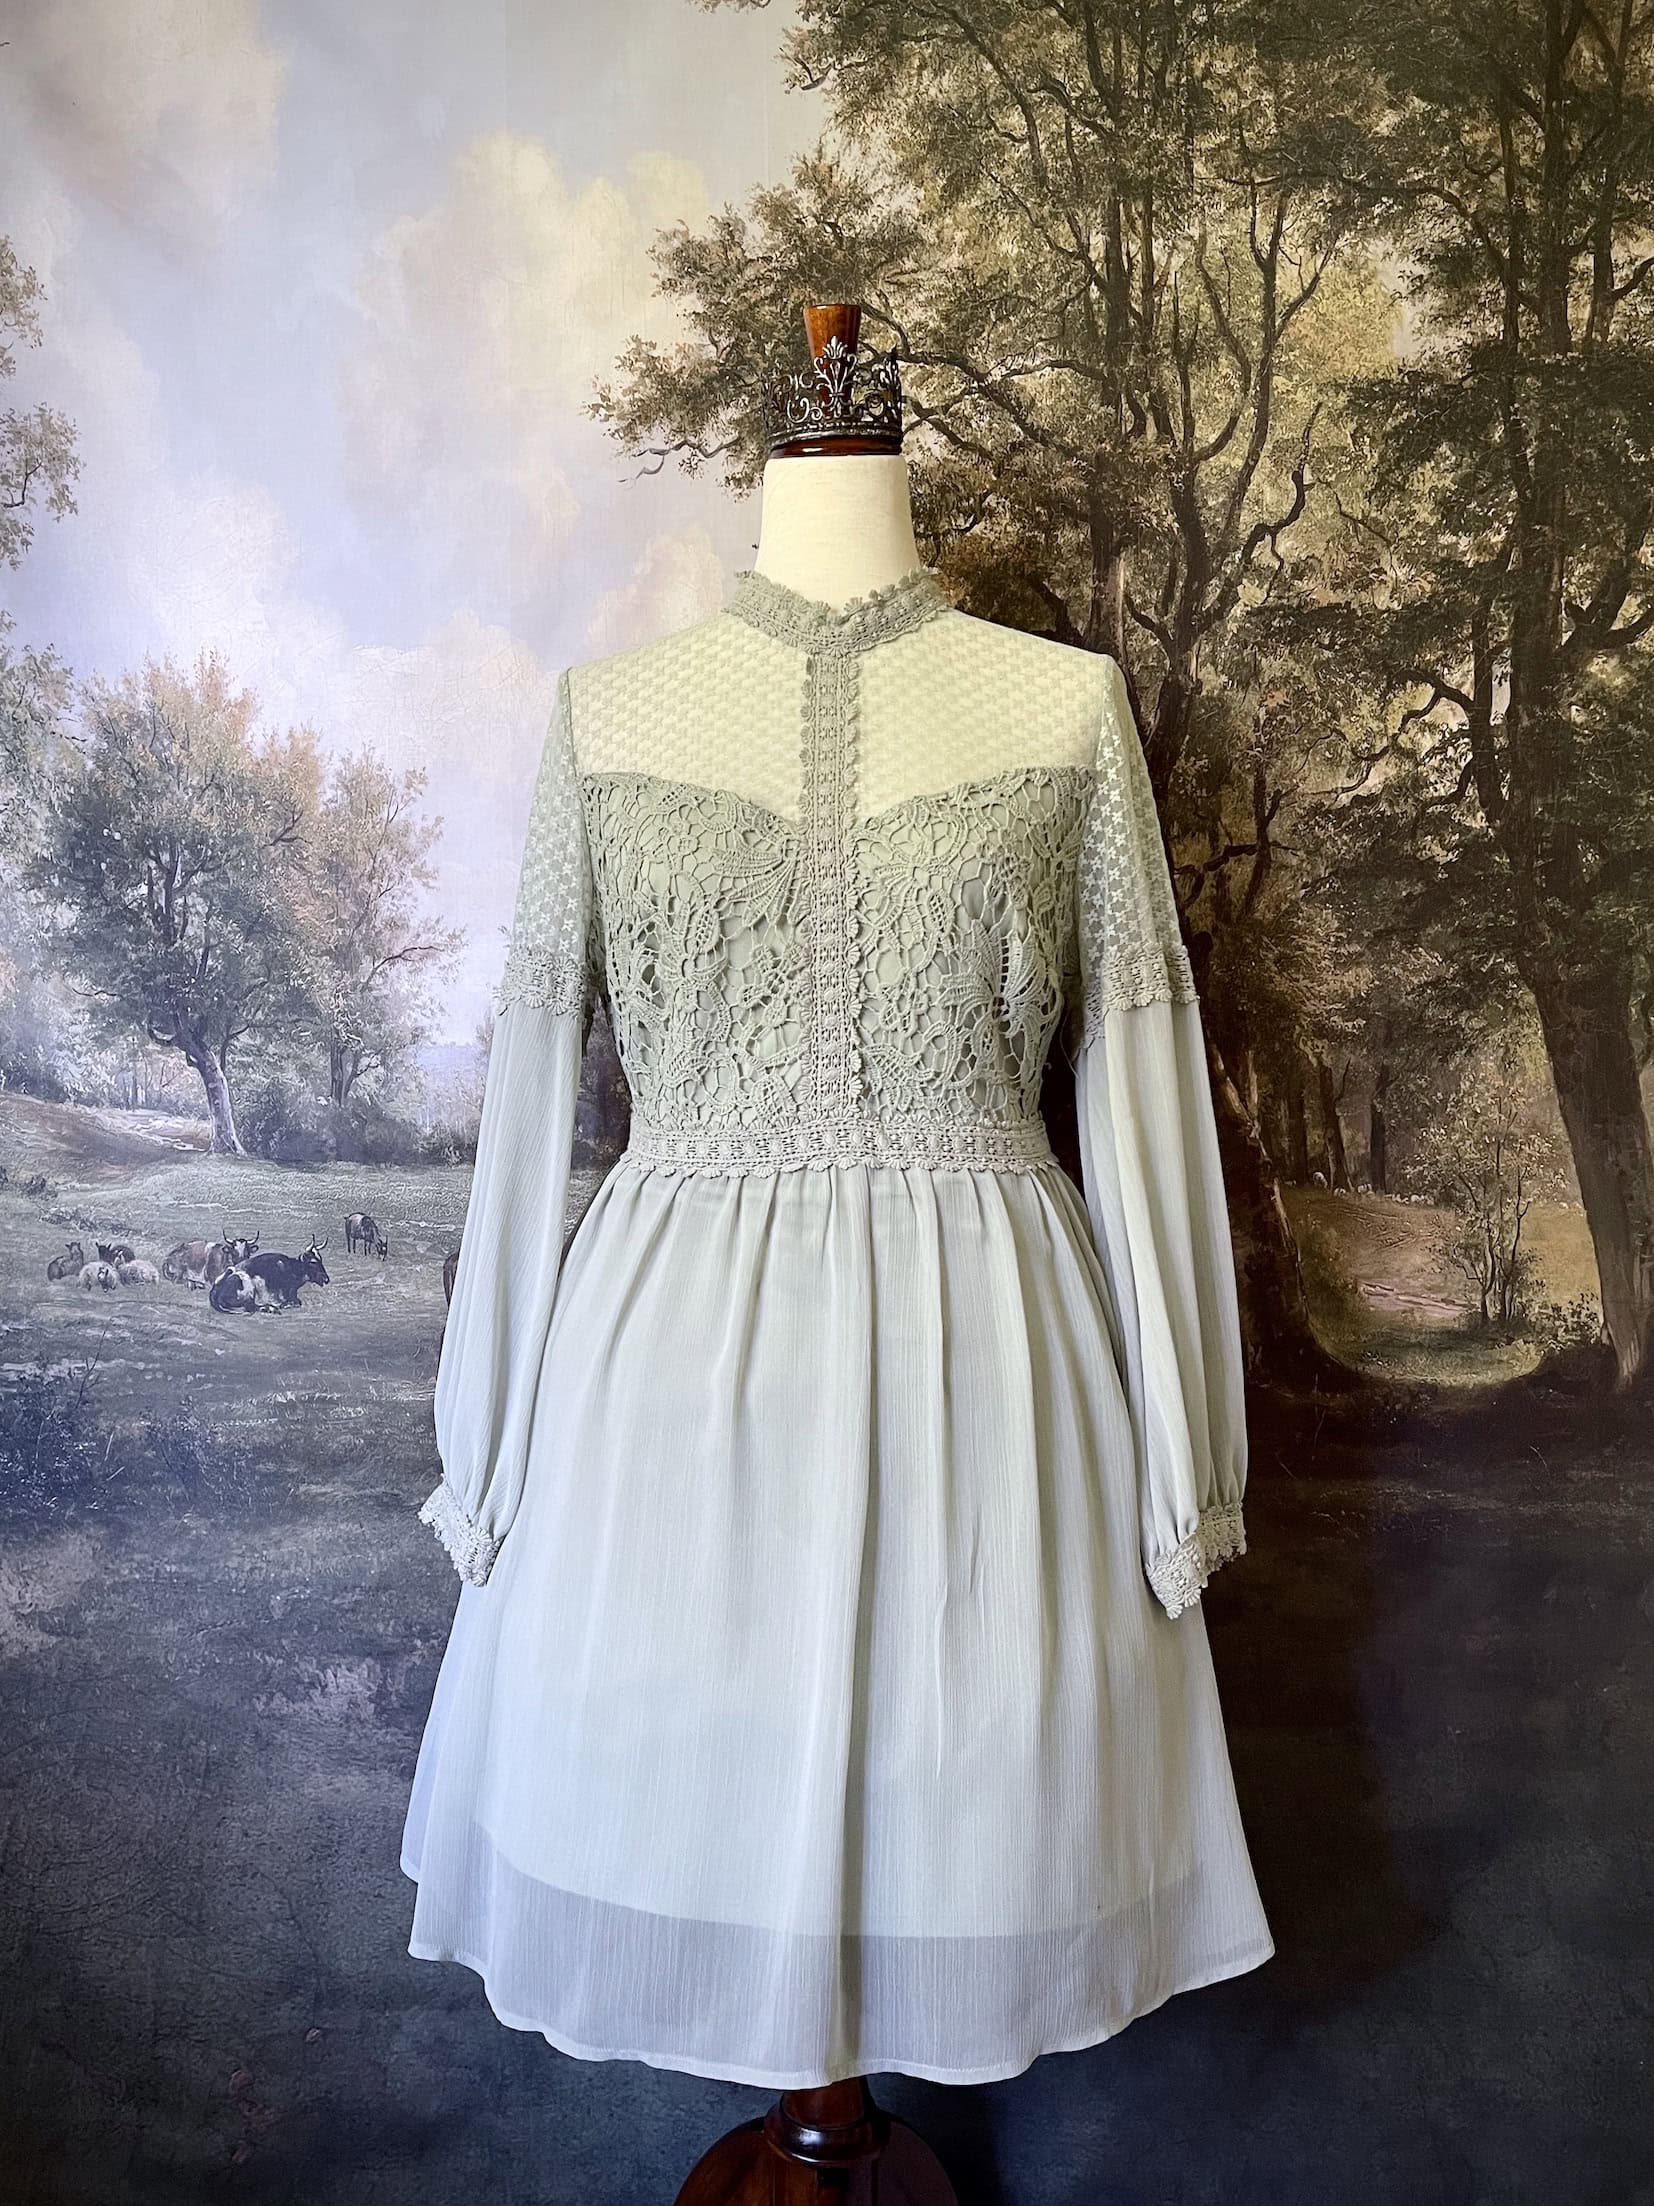 A historically inspired sage green edwardian fairytale dress with bishop sleeves and lace trim bodice is pictured on a mannequin in front of an art history backdrop.